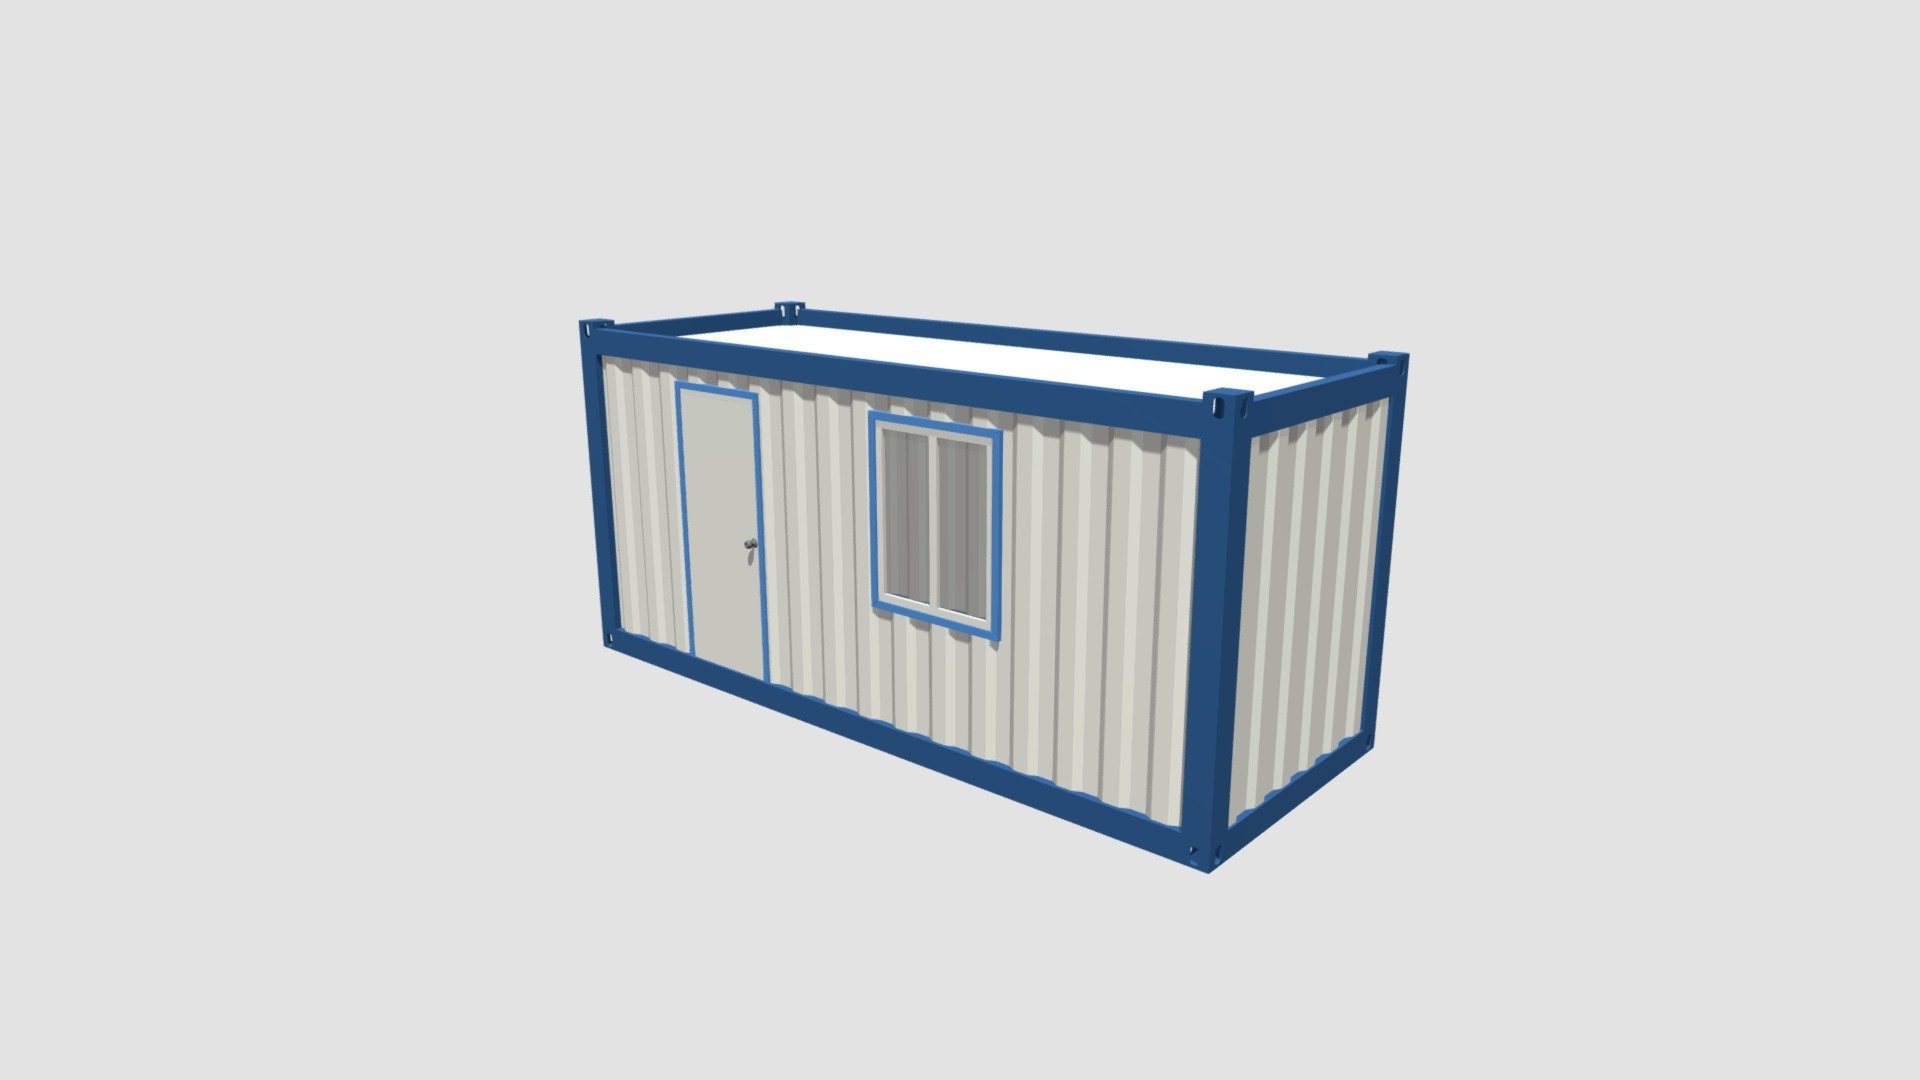 Highly detailed 3d model of container house with textures, shaders and materials. It is ready to use, just put it into your scene 3d model